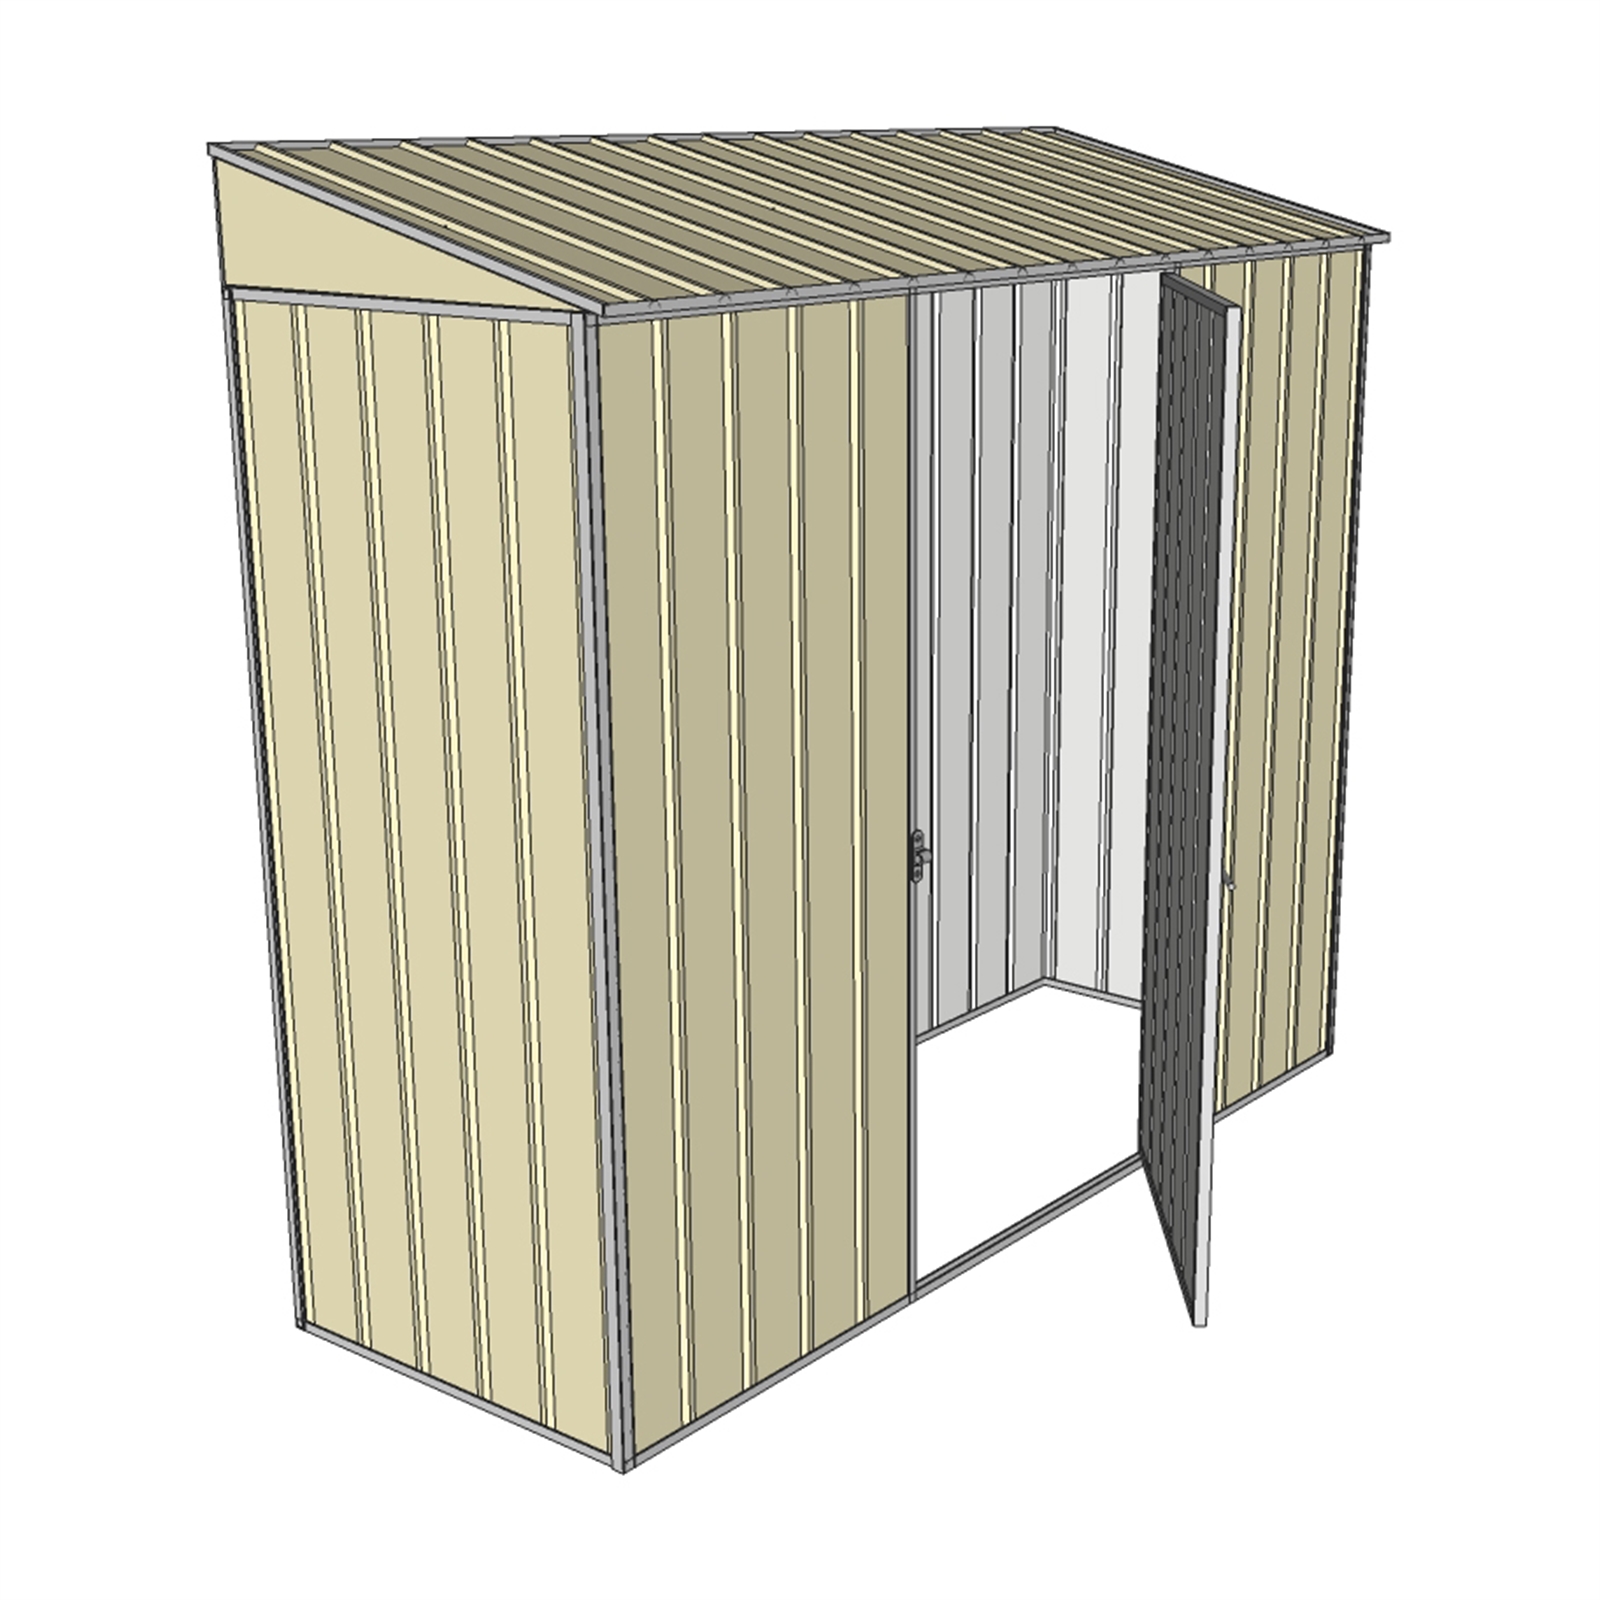 Build-a-Shed 2.3 x 0.8m Cream Skillion Single Hinged Door Narrow Shed